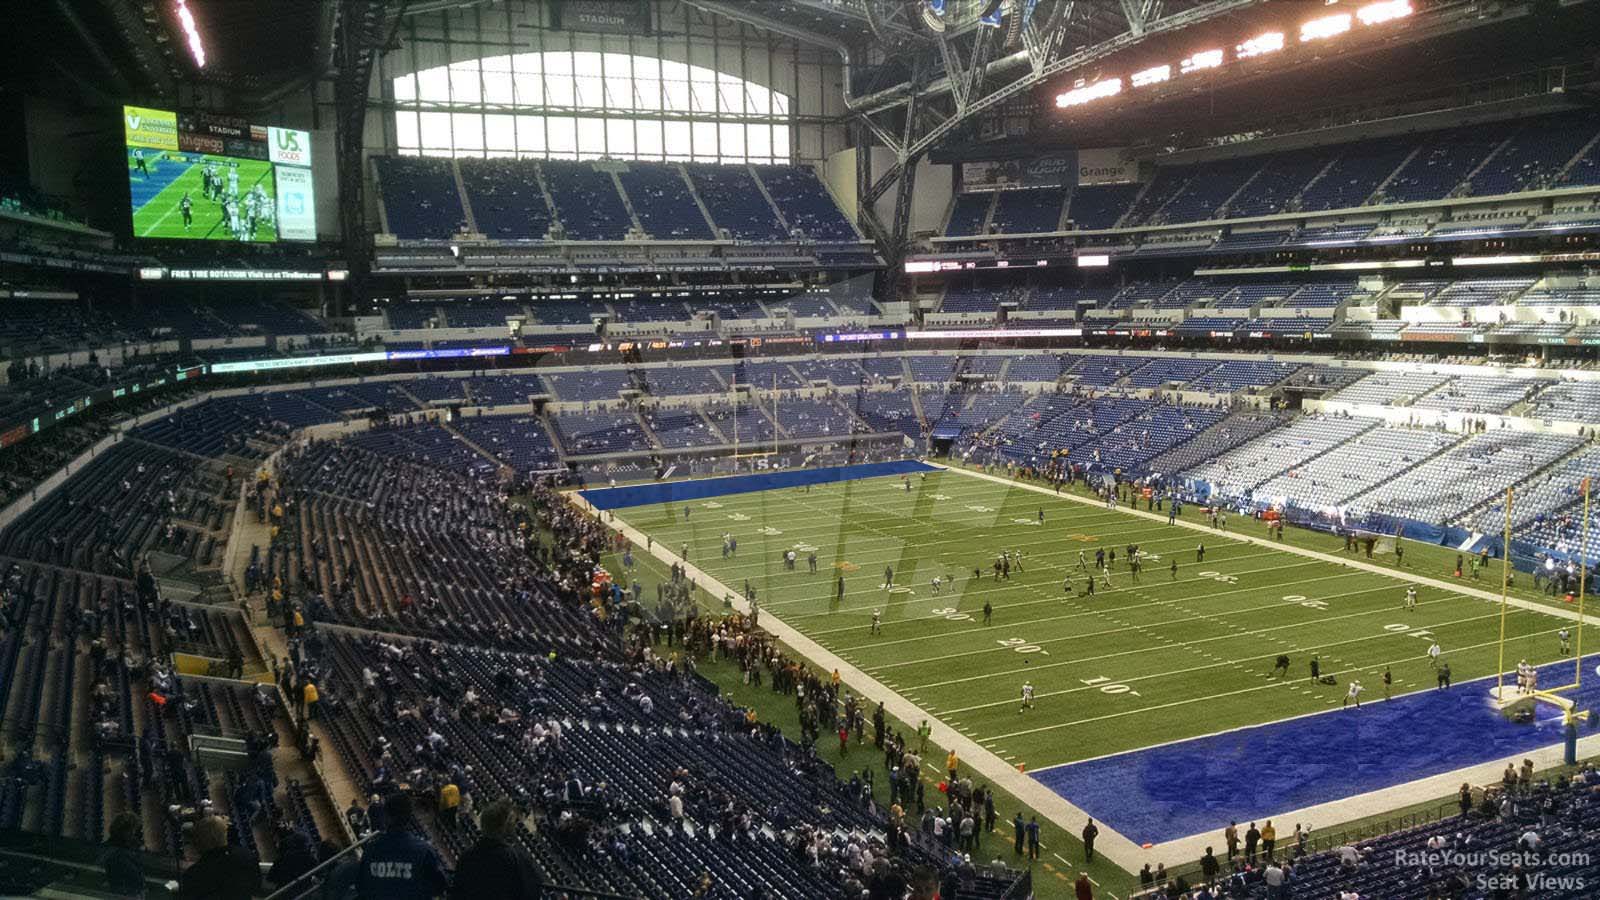 section 404, row 6 seat view  for football - lucas oil stadium